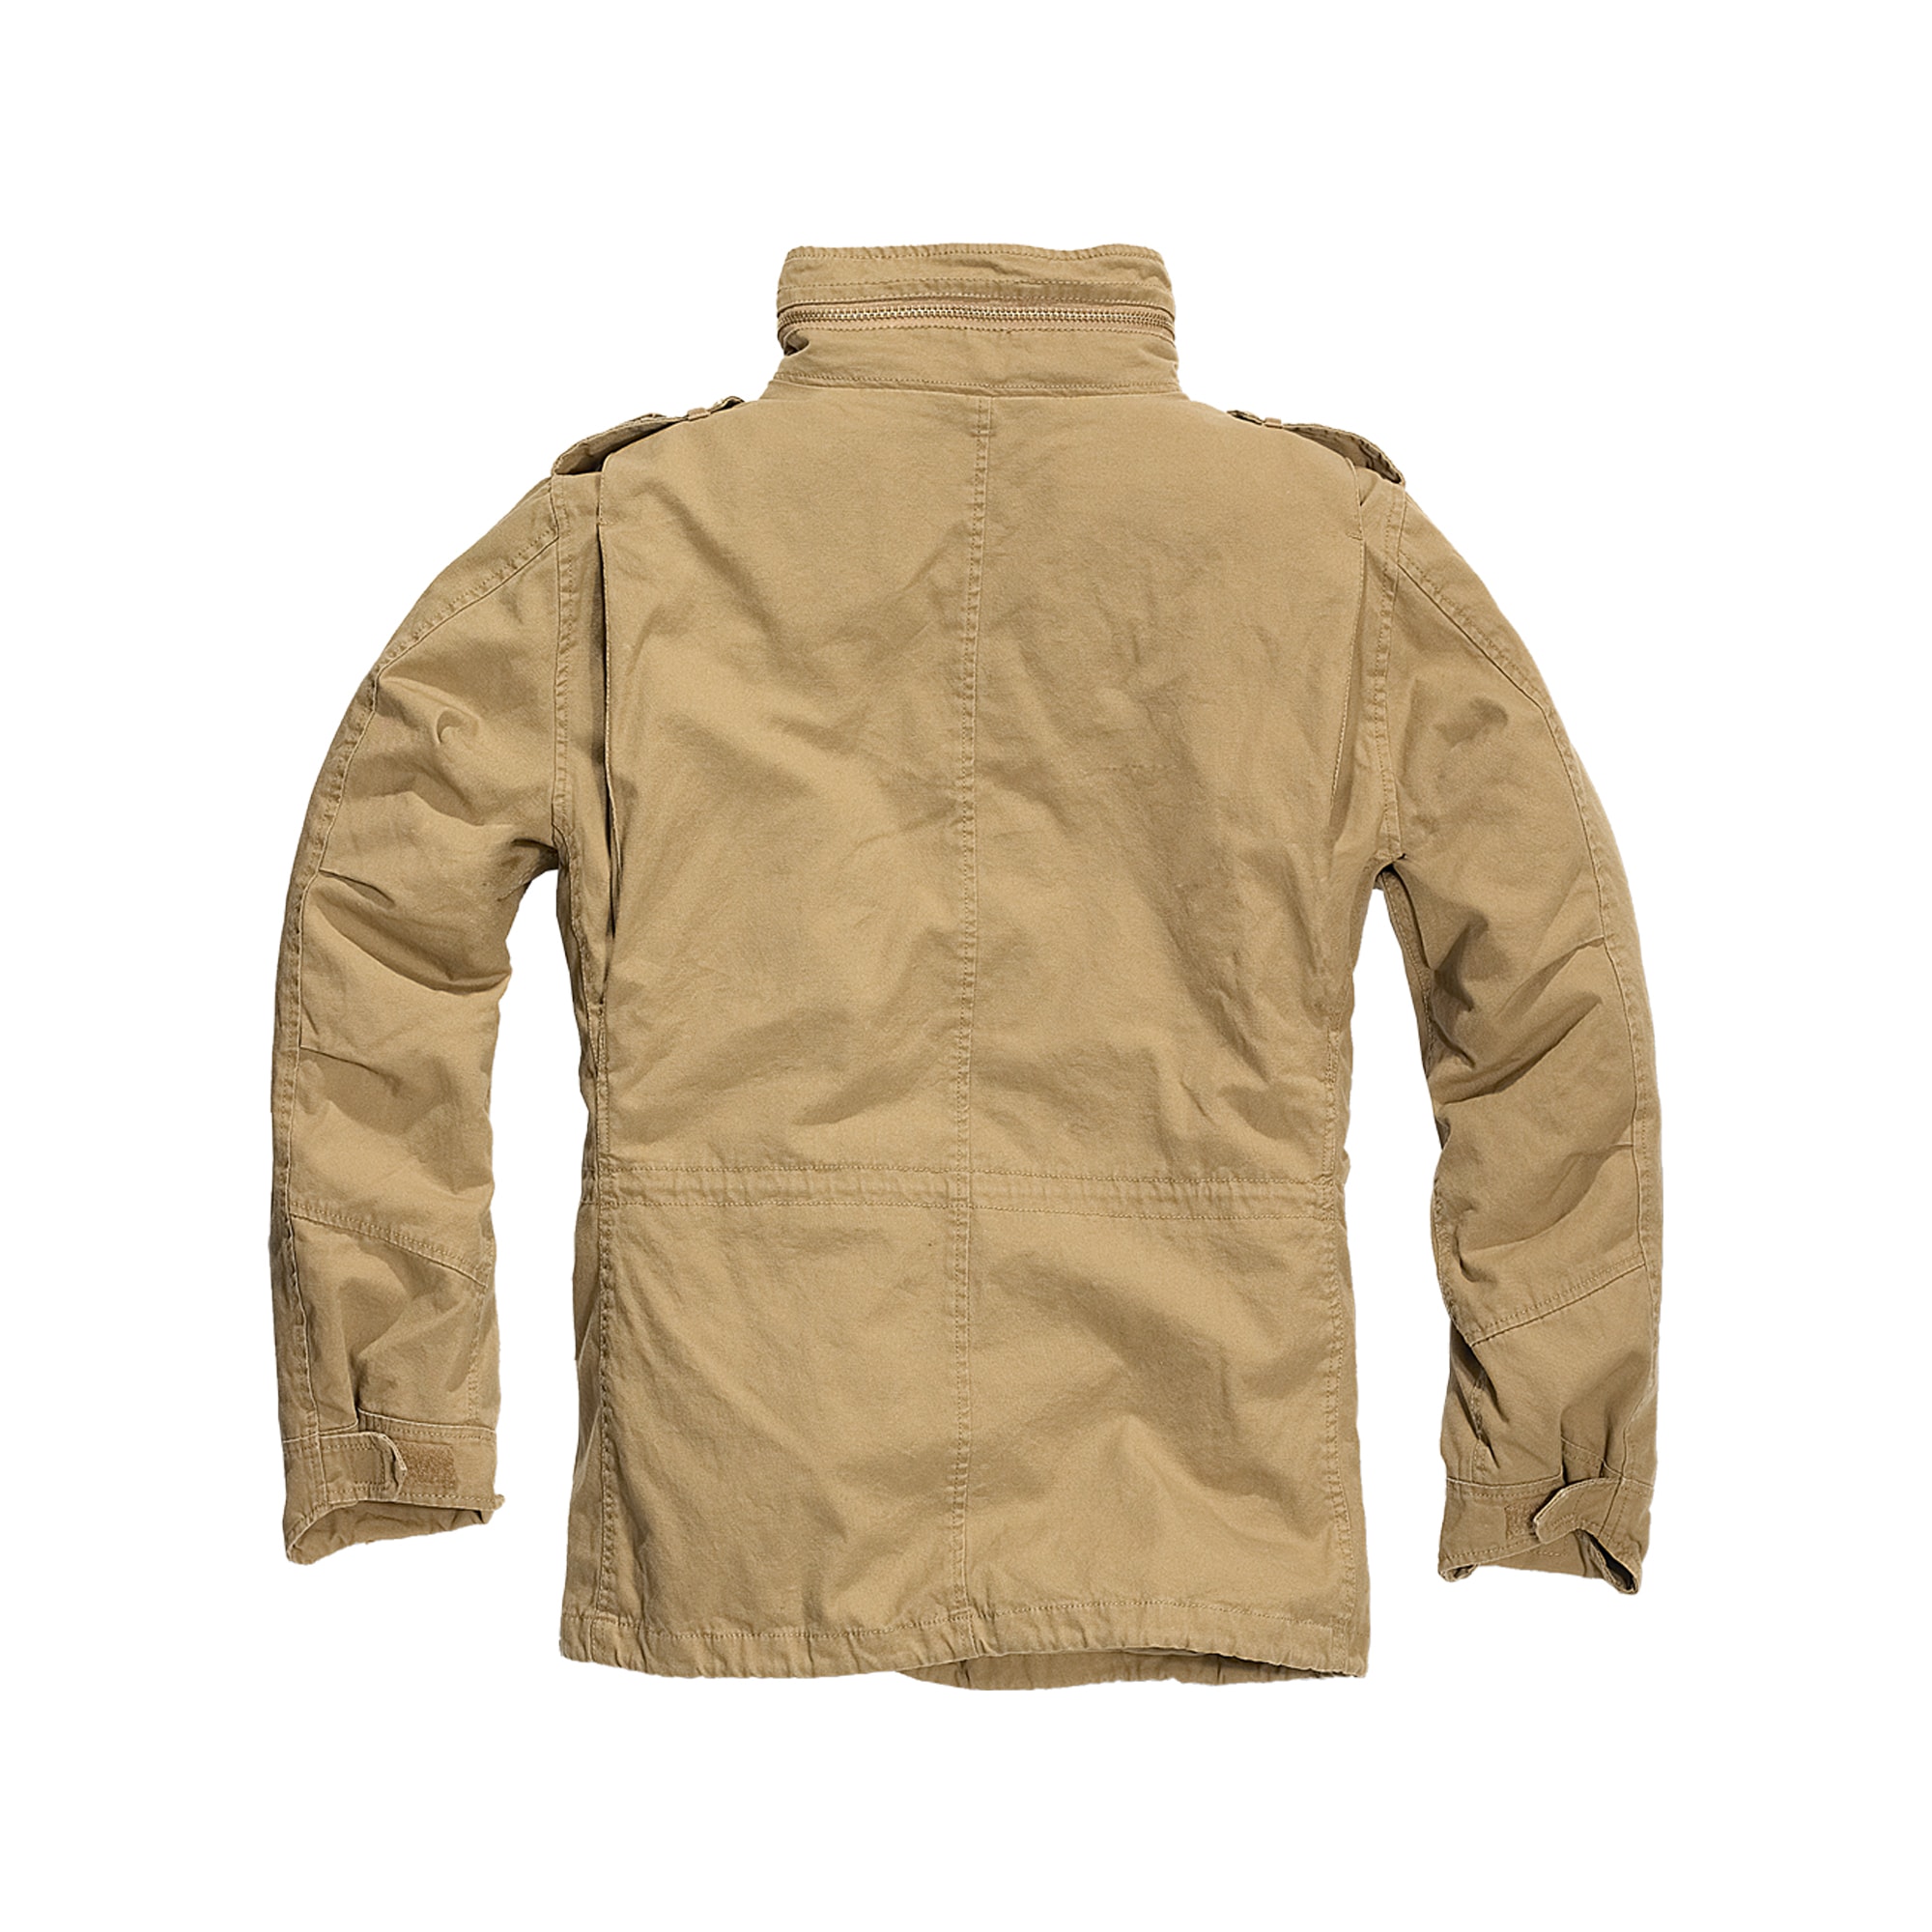 Purchase the Brandit Jacket by ASMC camel Giant M-65